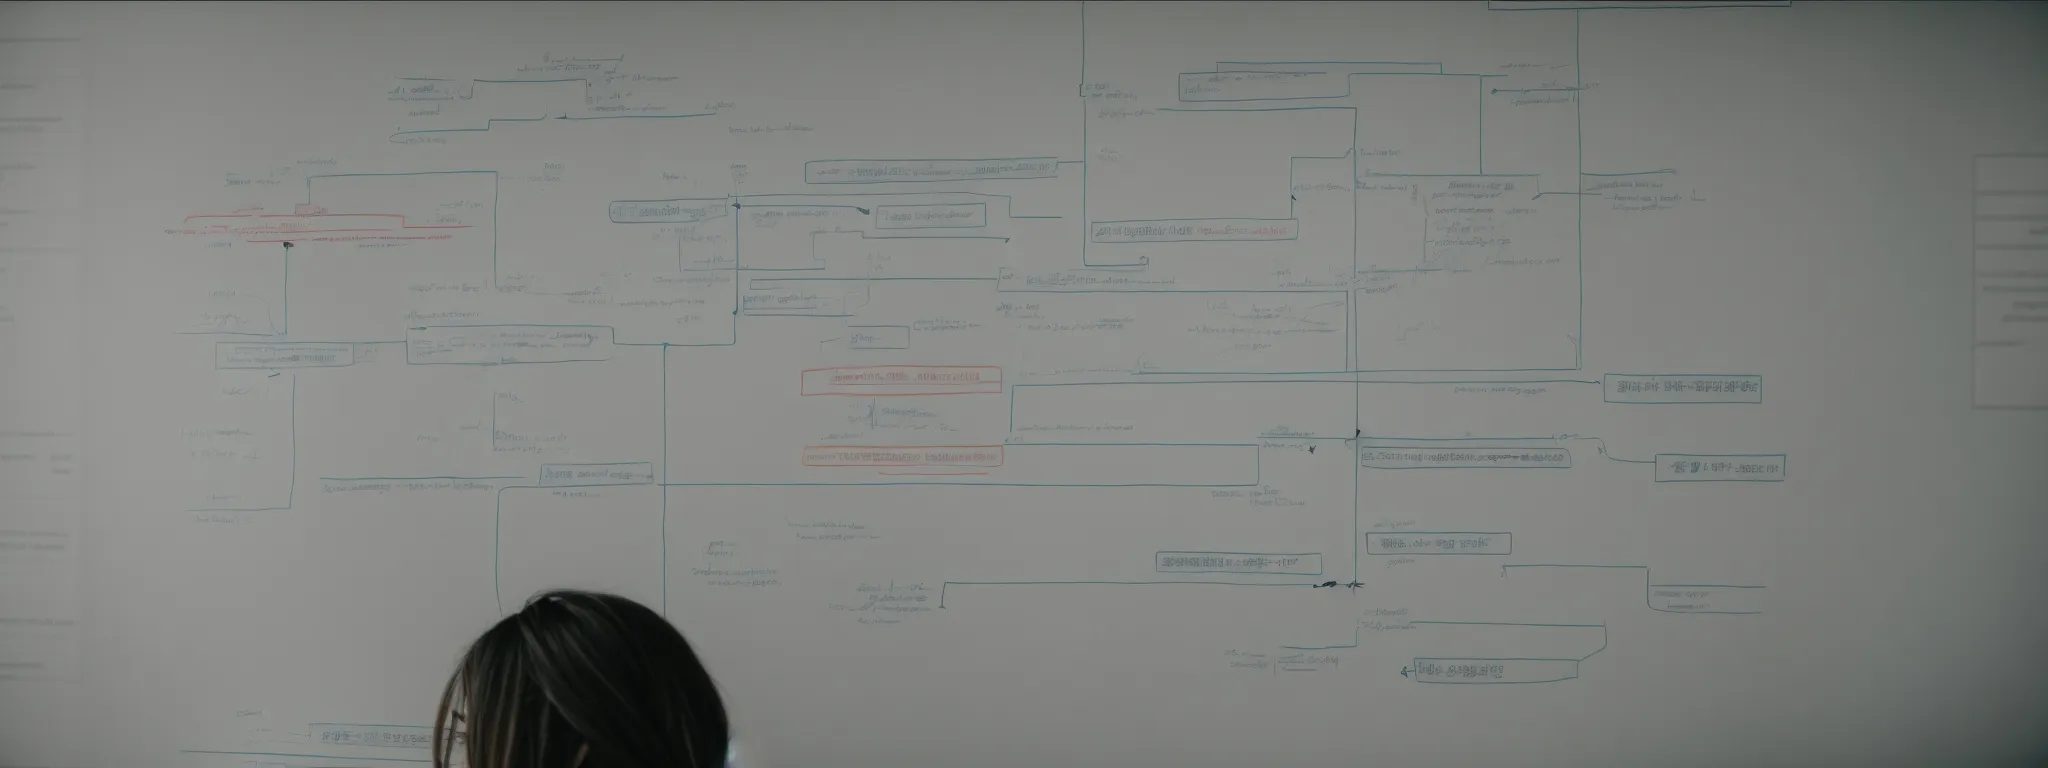 a person staring at a complex flowchart on a whiteboard depicting website architecture and redirection strategies.